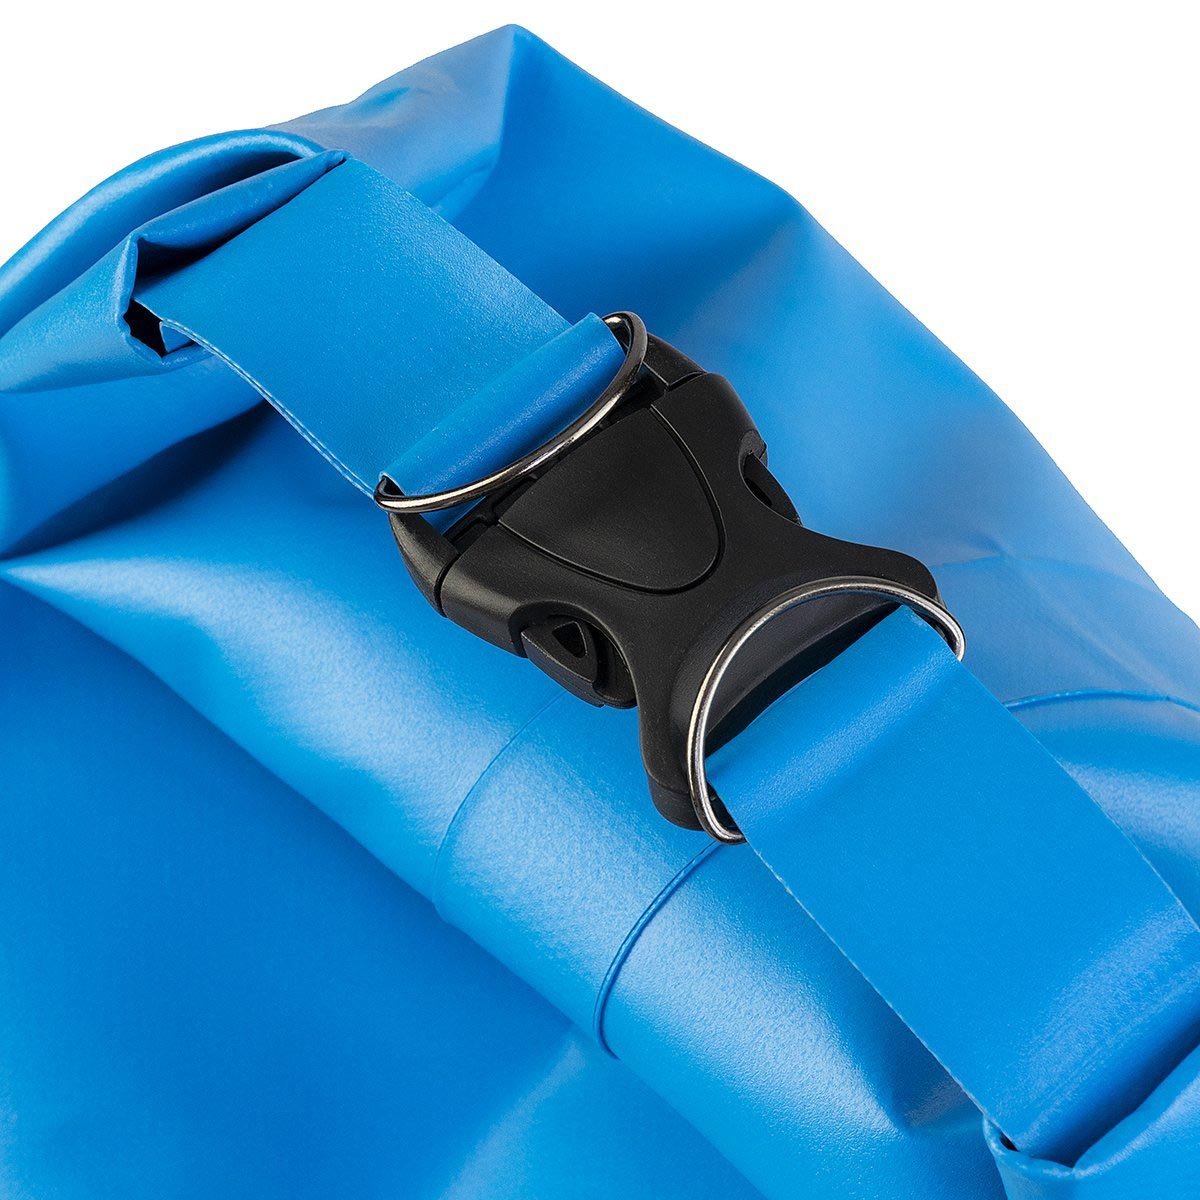 70L Waterproof Large Dry Bag is easy to lock and carry